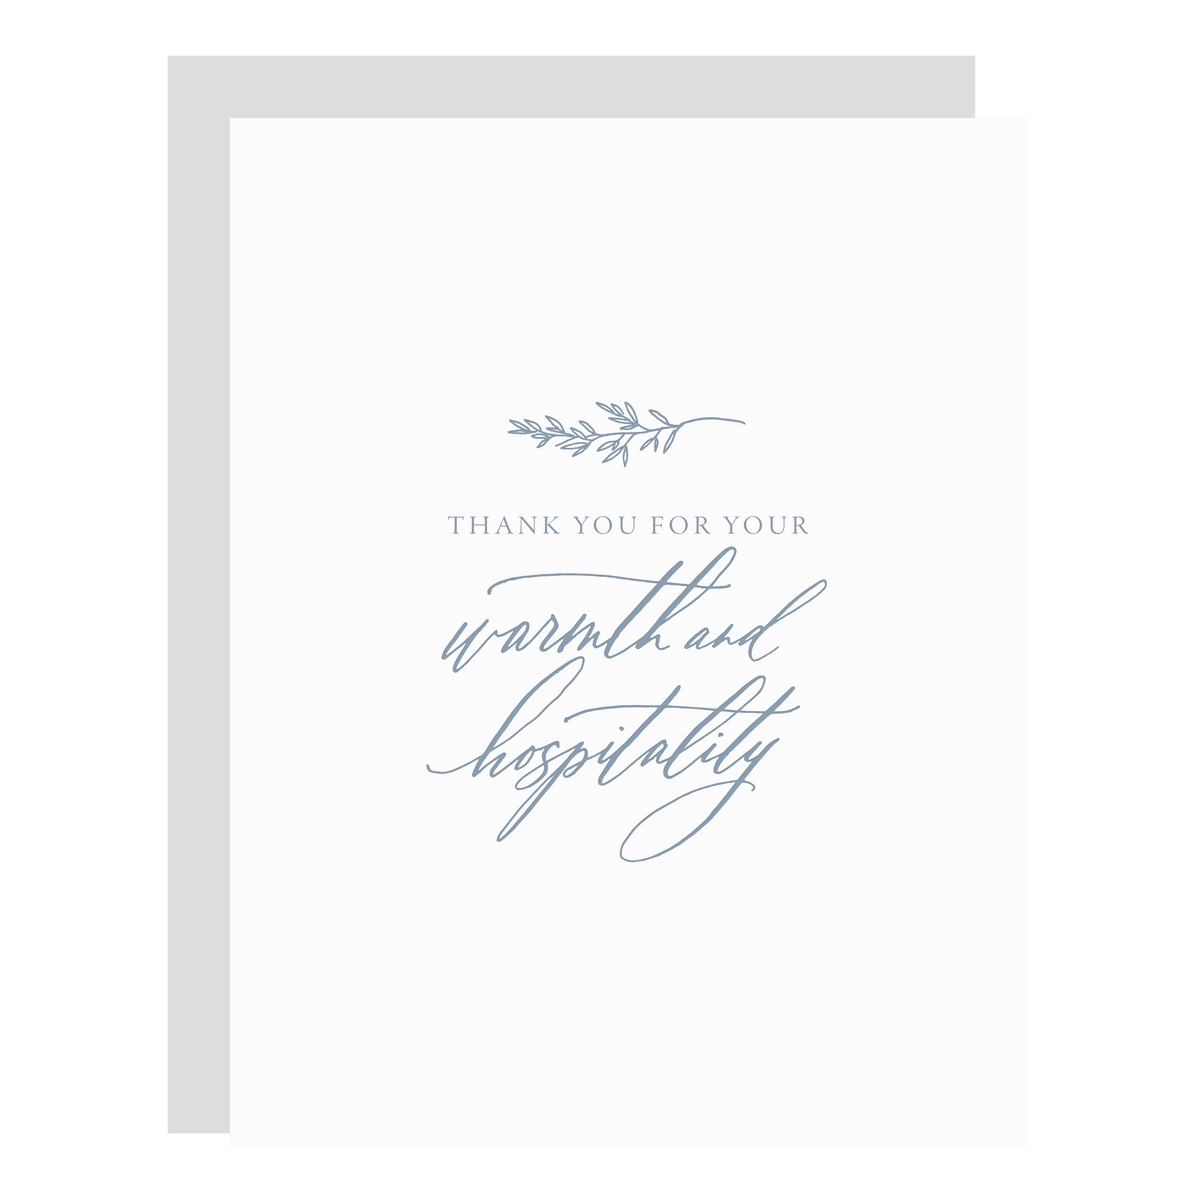 &quot;Warmth and Hospitality&quot; card, letterpress printed by hand in dusty blue ink.